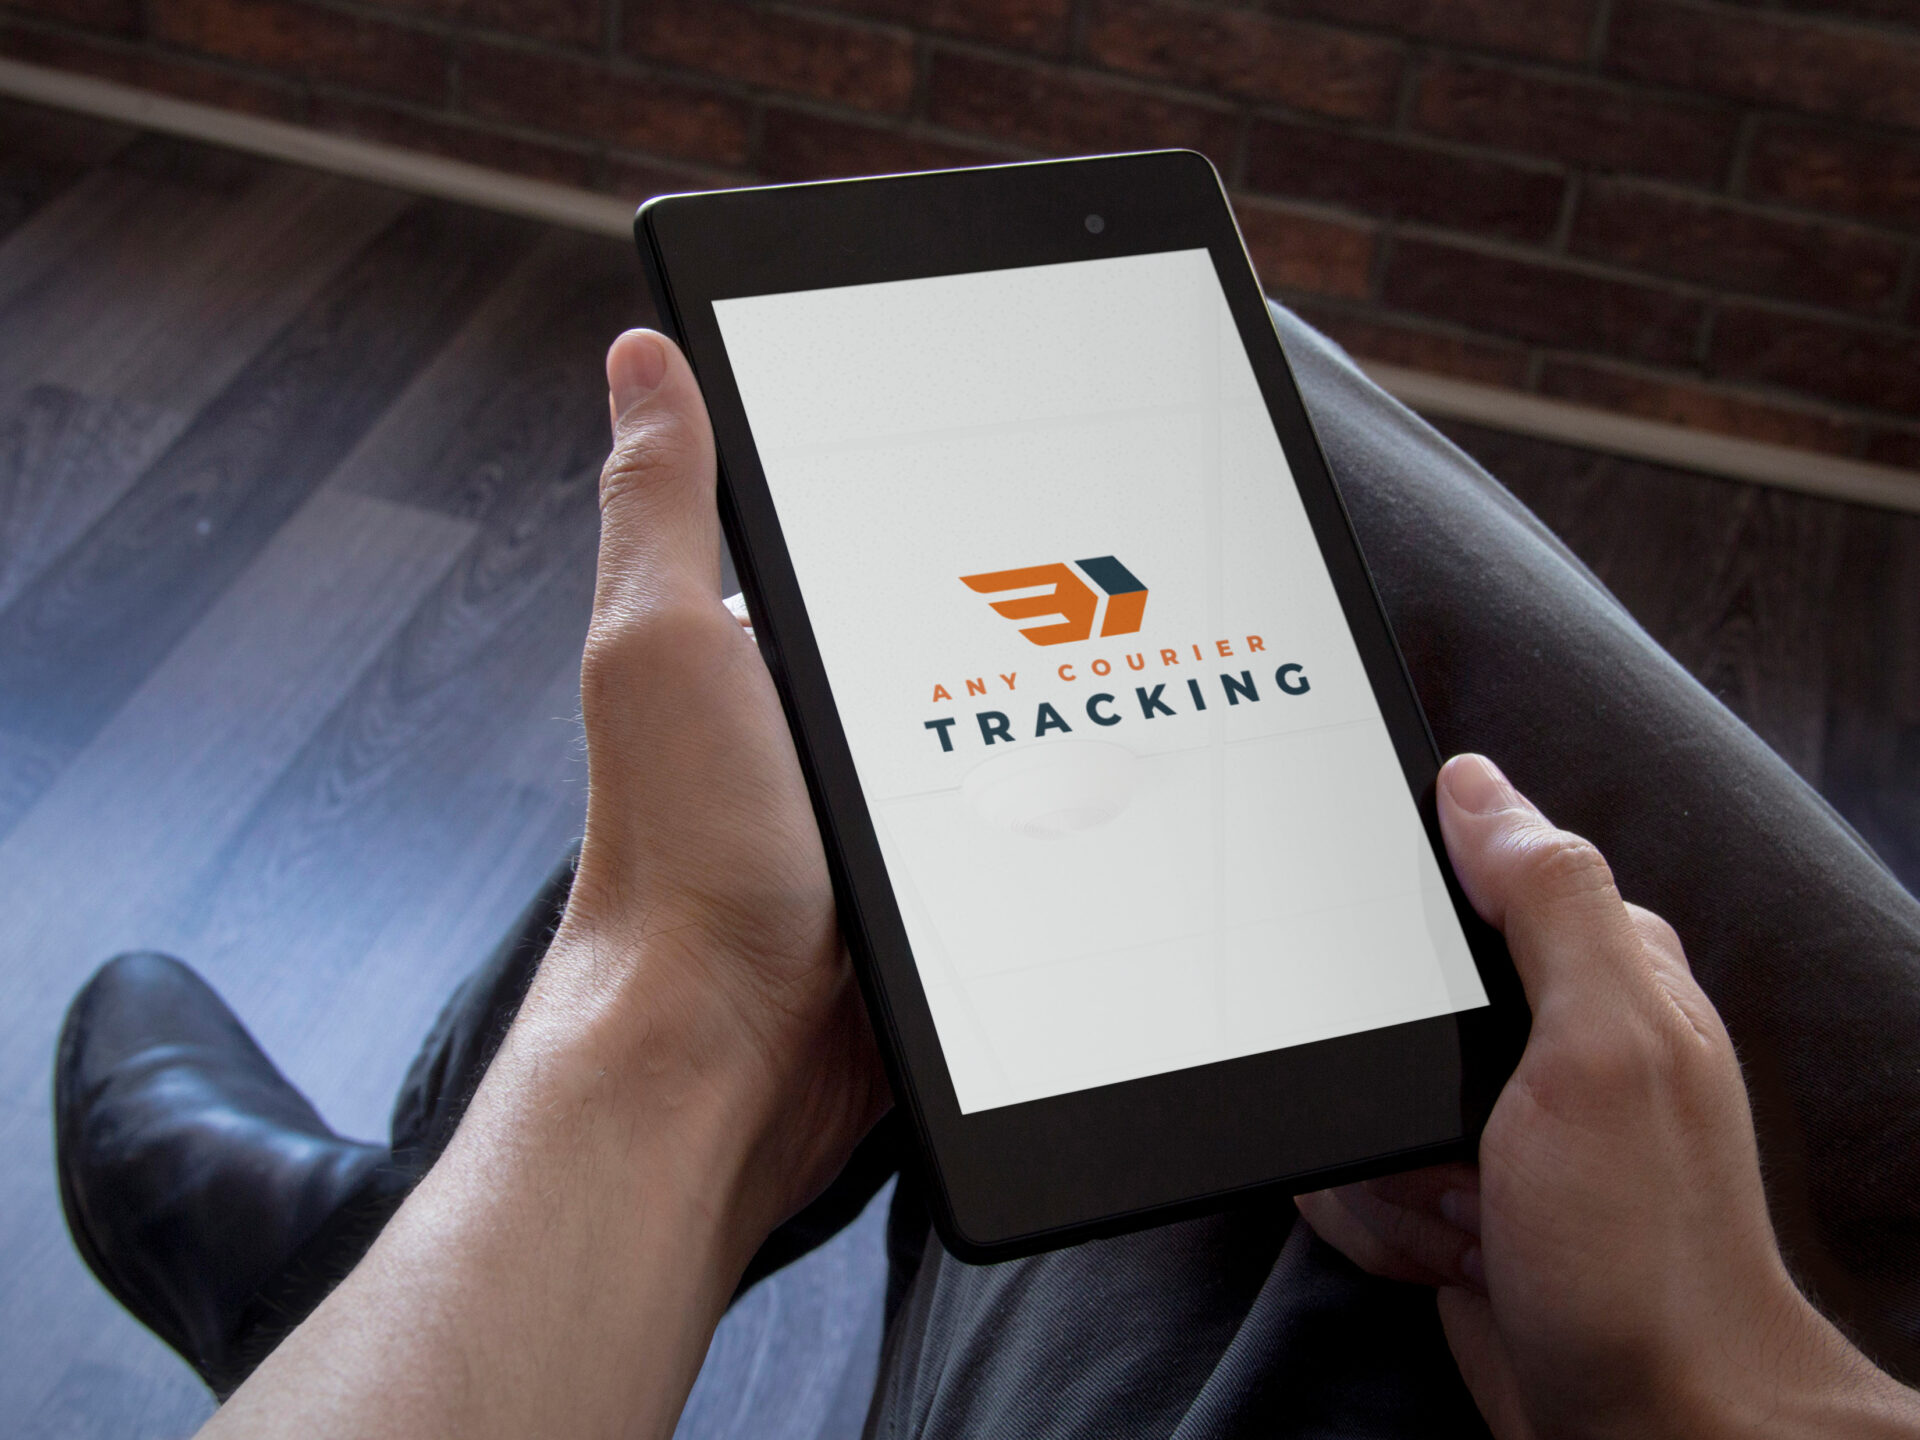  Courier Tracking World Wide